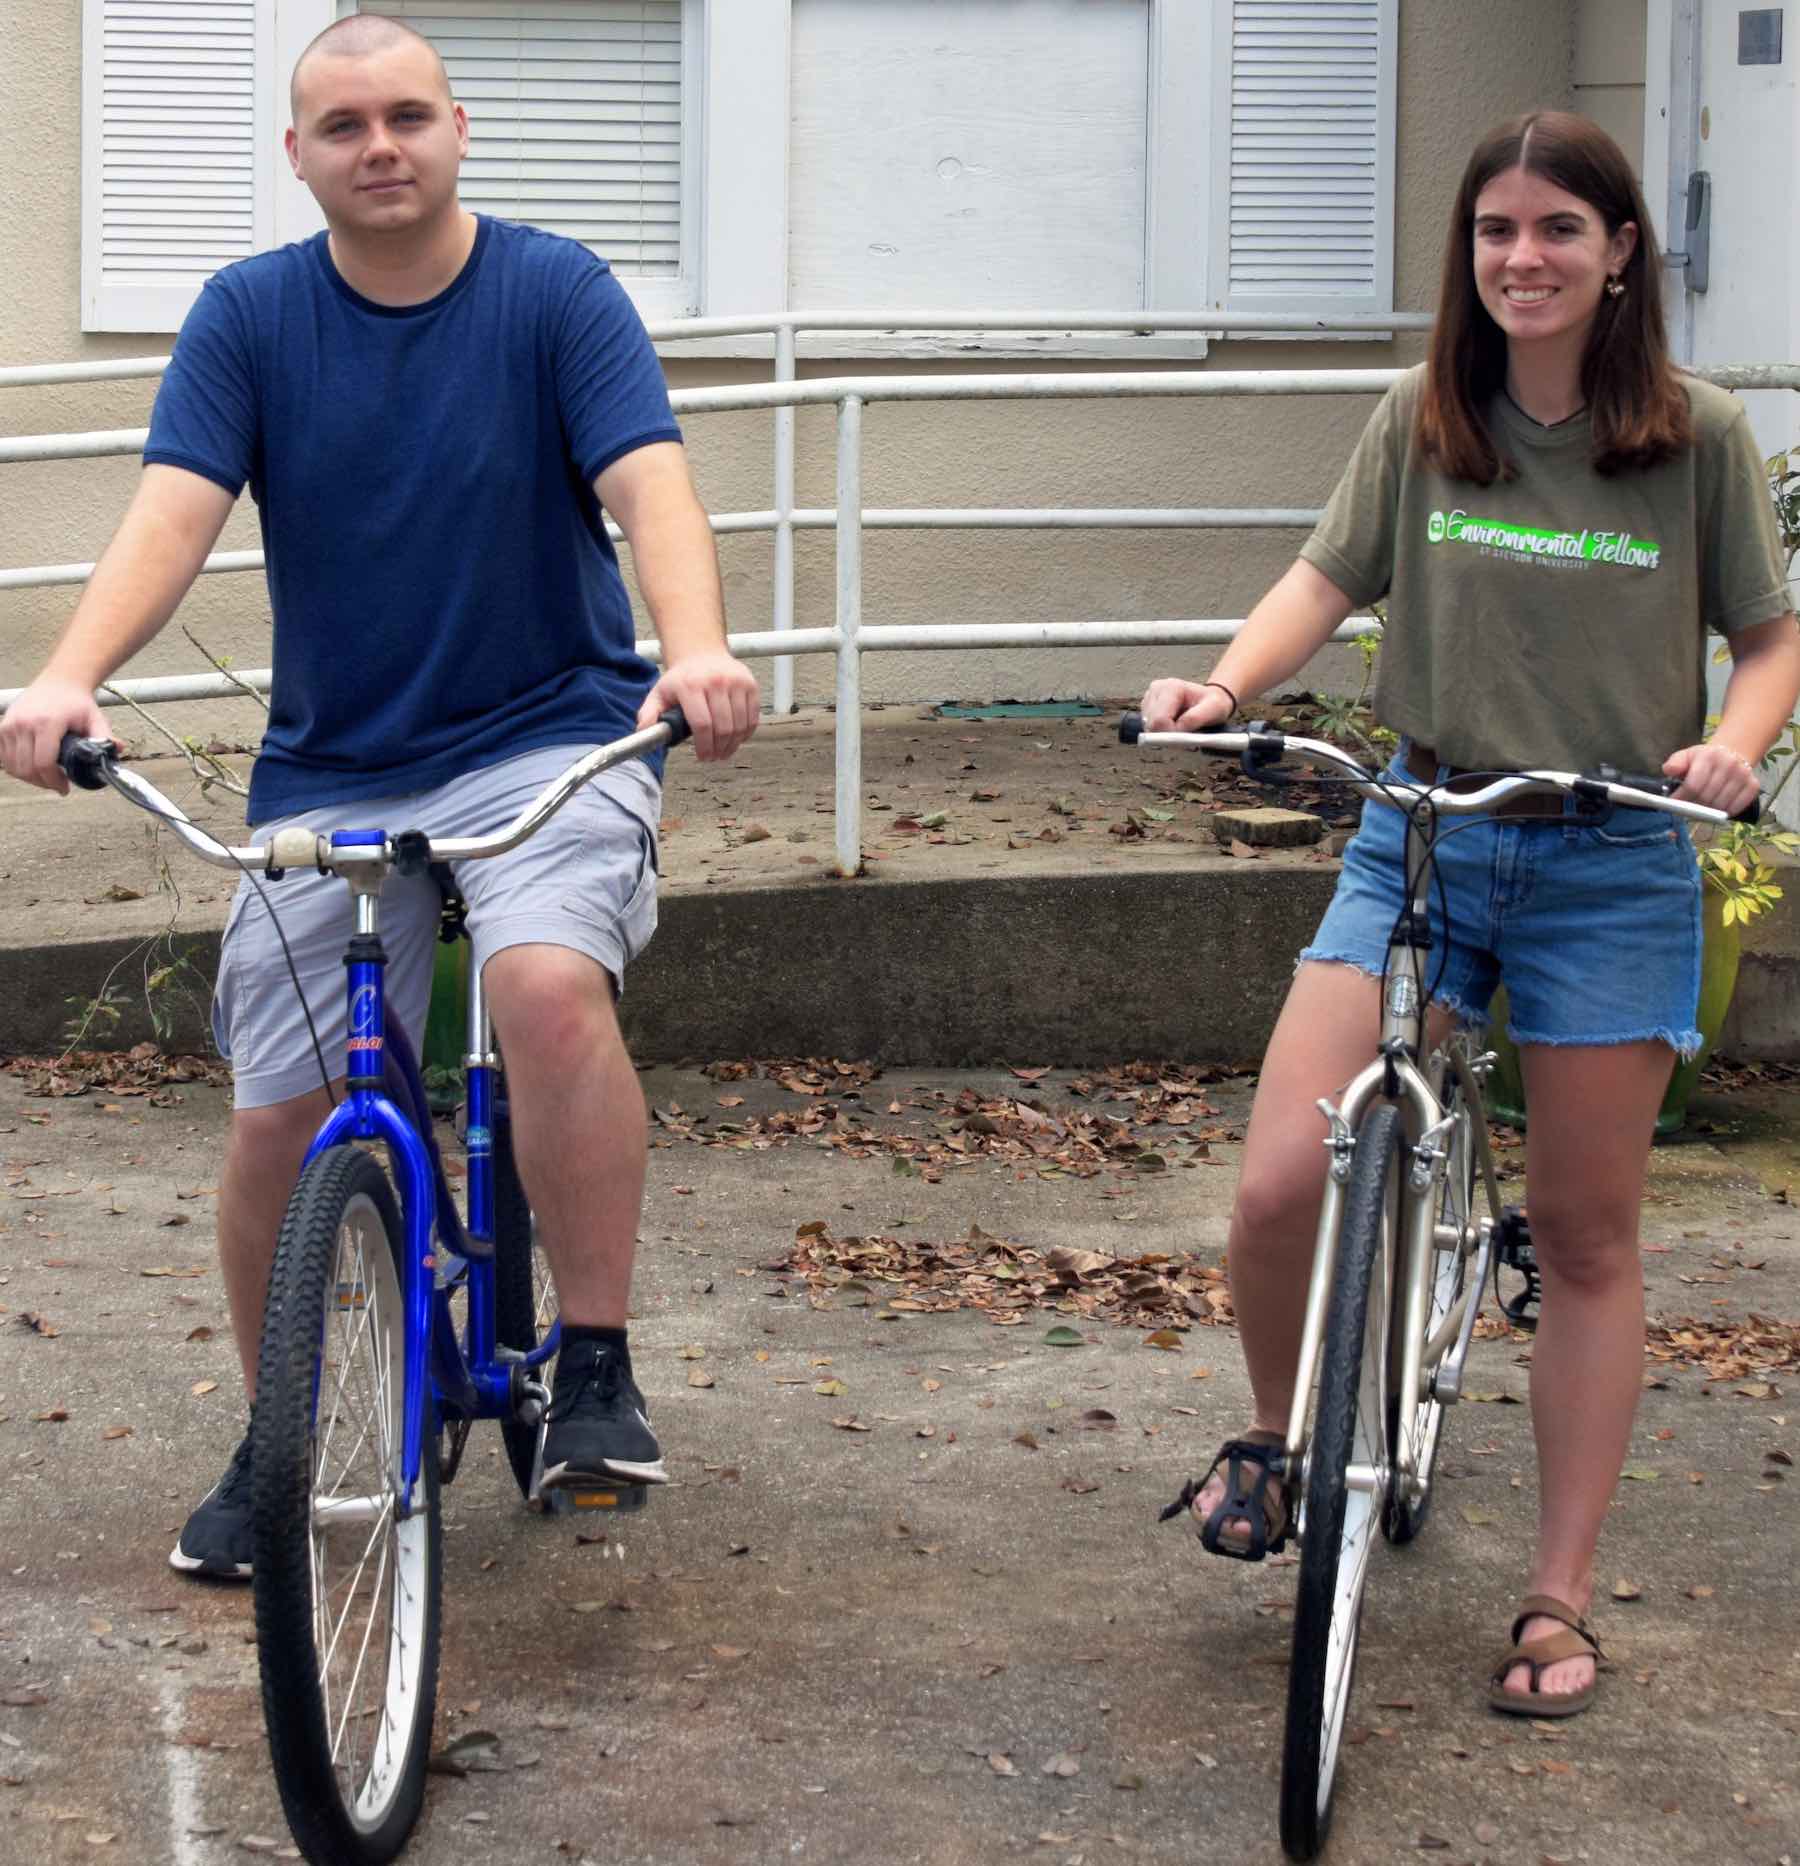 Two students pose on bicycles